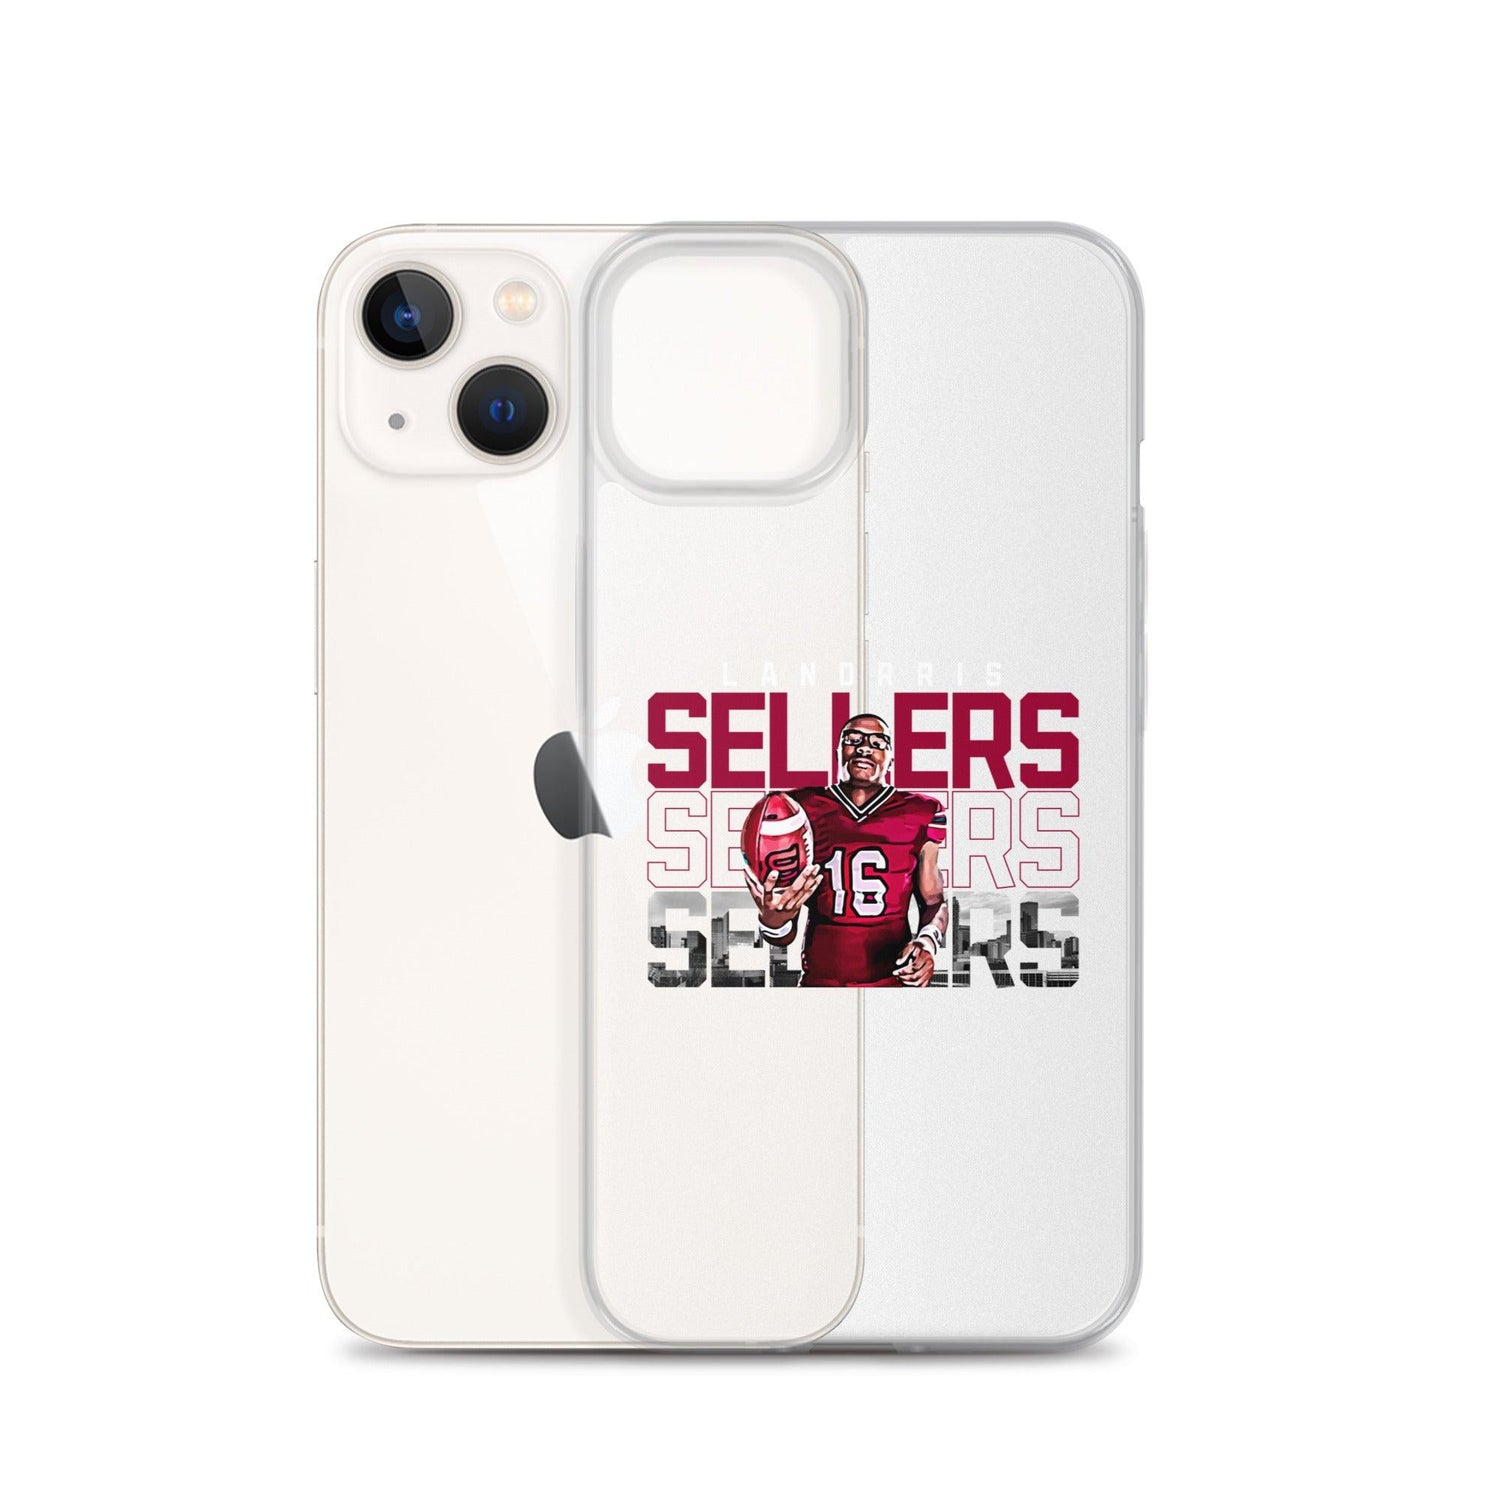 Lanorris Sellers "Gameday" iPhone Case - Fan Arch